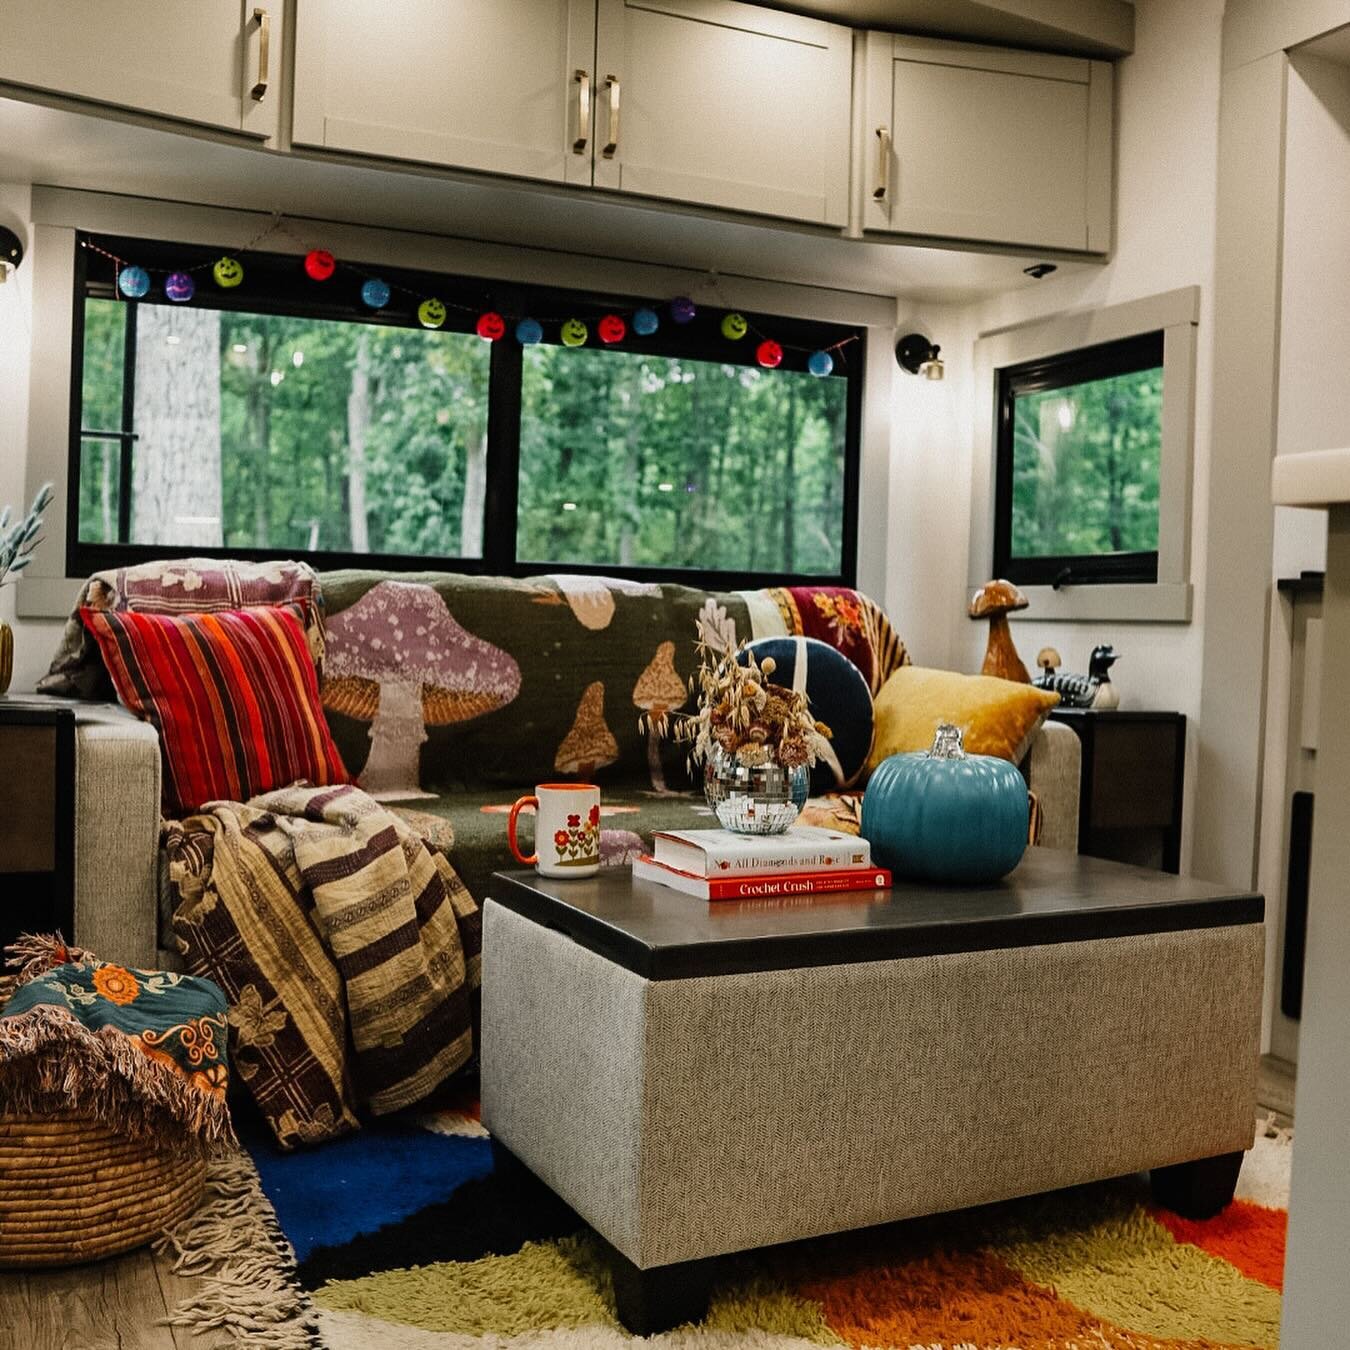 7 Ways to Improve RV Bathroom Storage — Stairs Up - Handle In: Full-Time RV  Life